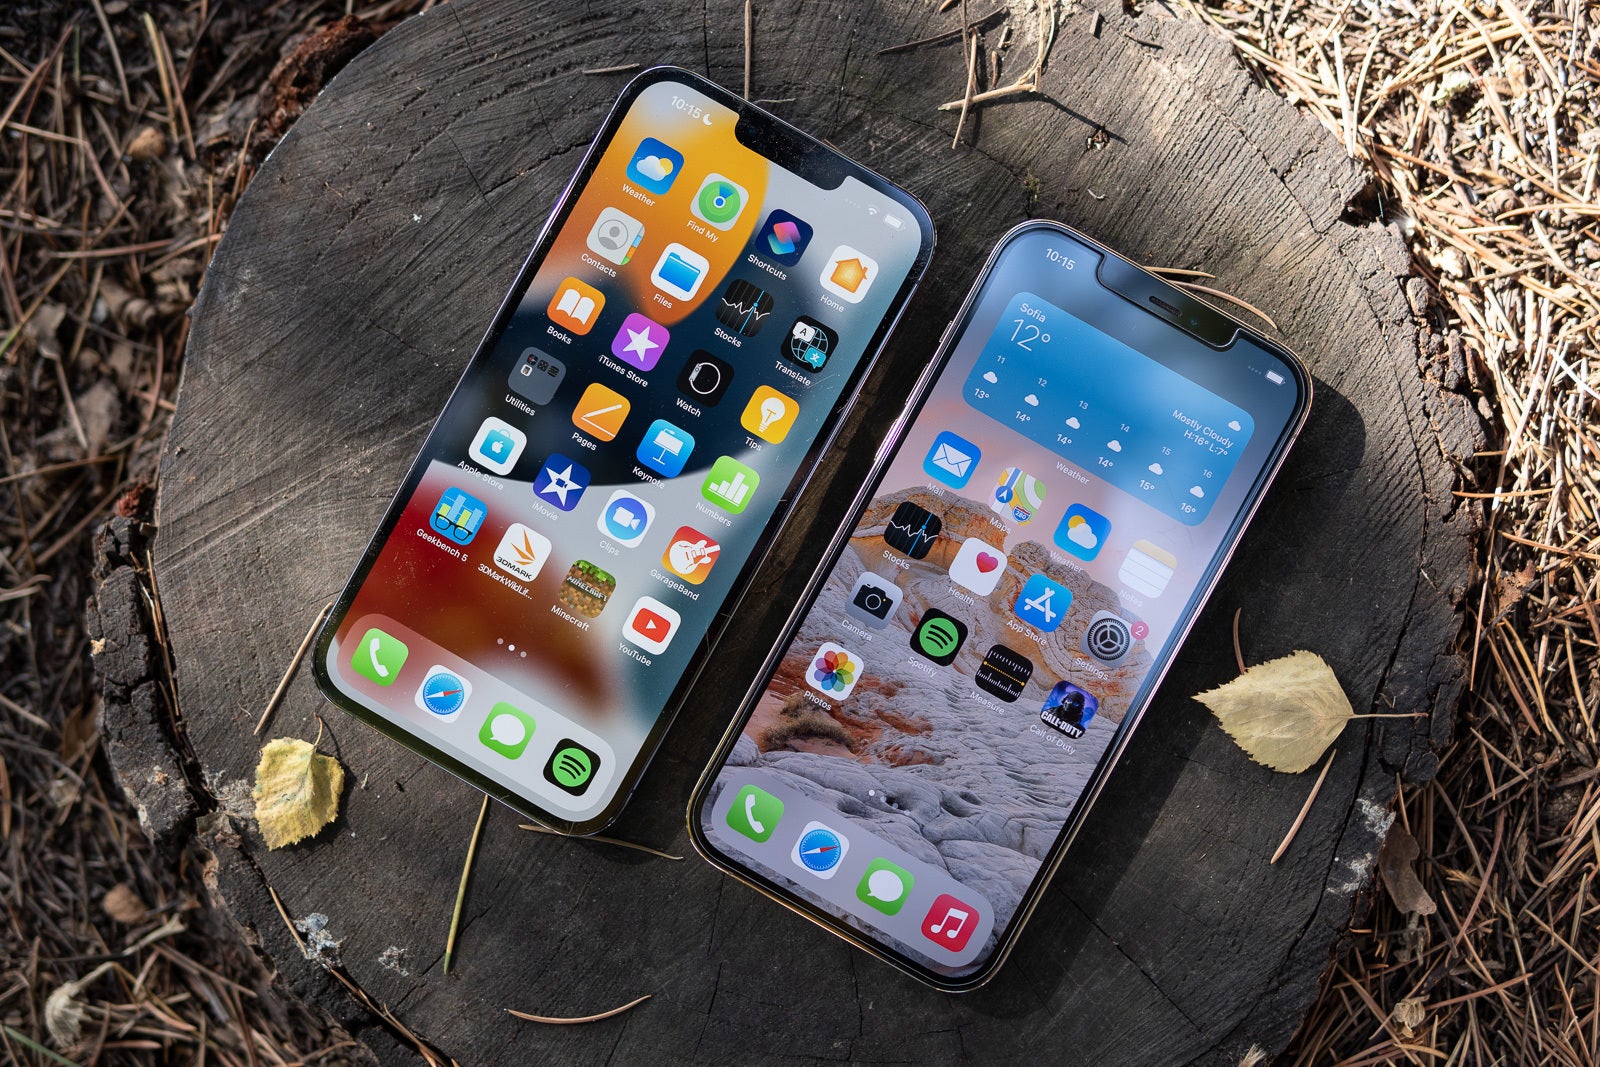 iPhone 13 Pro Max on the left, 12 Pro Max — on the right - iPhone 13 Pro Max vs iPhone 12 Pro Max